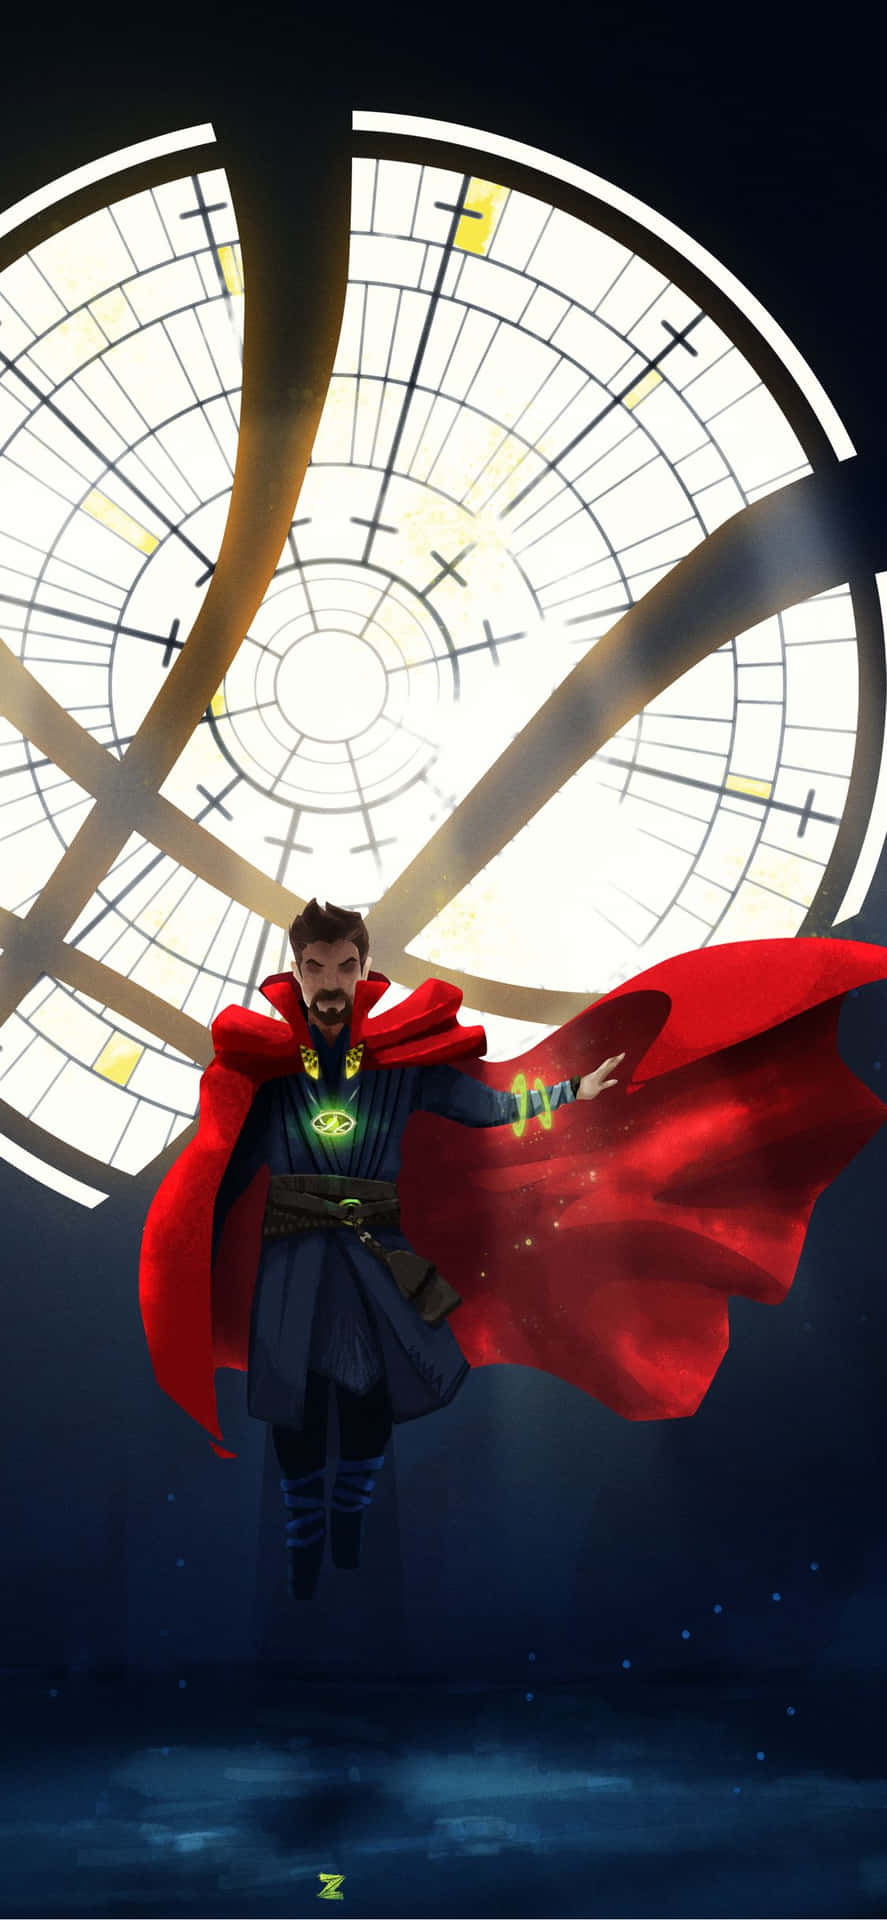 Get your hands on the new Doctor Strange iPhone Wallpaper